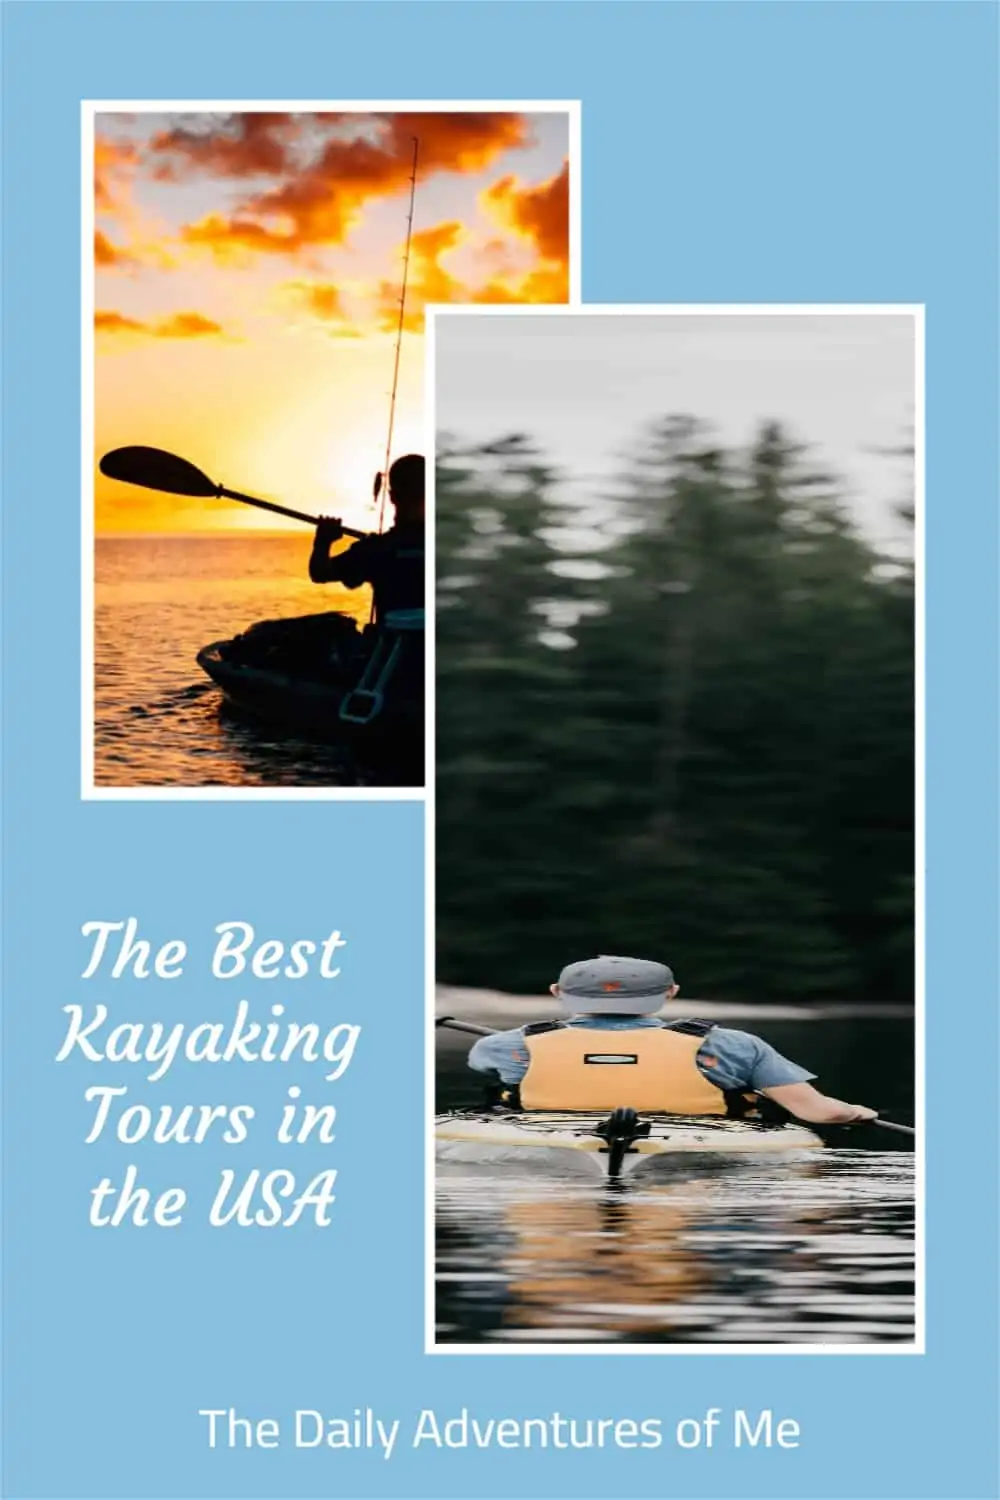 Canyons in Arizona, gem-colored islands of Washington state, or the mangrove forests in Florida- which kayak tour in the US floats your boat? Read on for details on fabulous US kayaking tours. #kayakingtours #USAtravel #kayaktrips